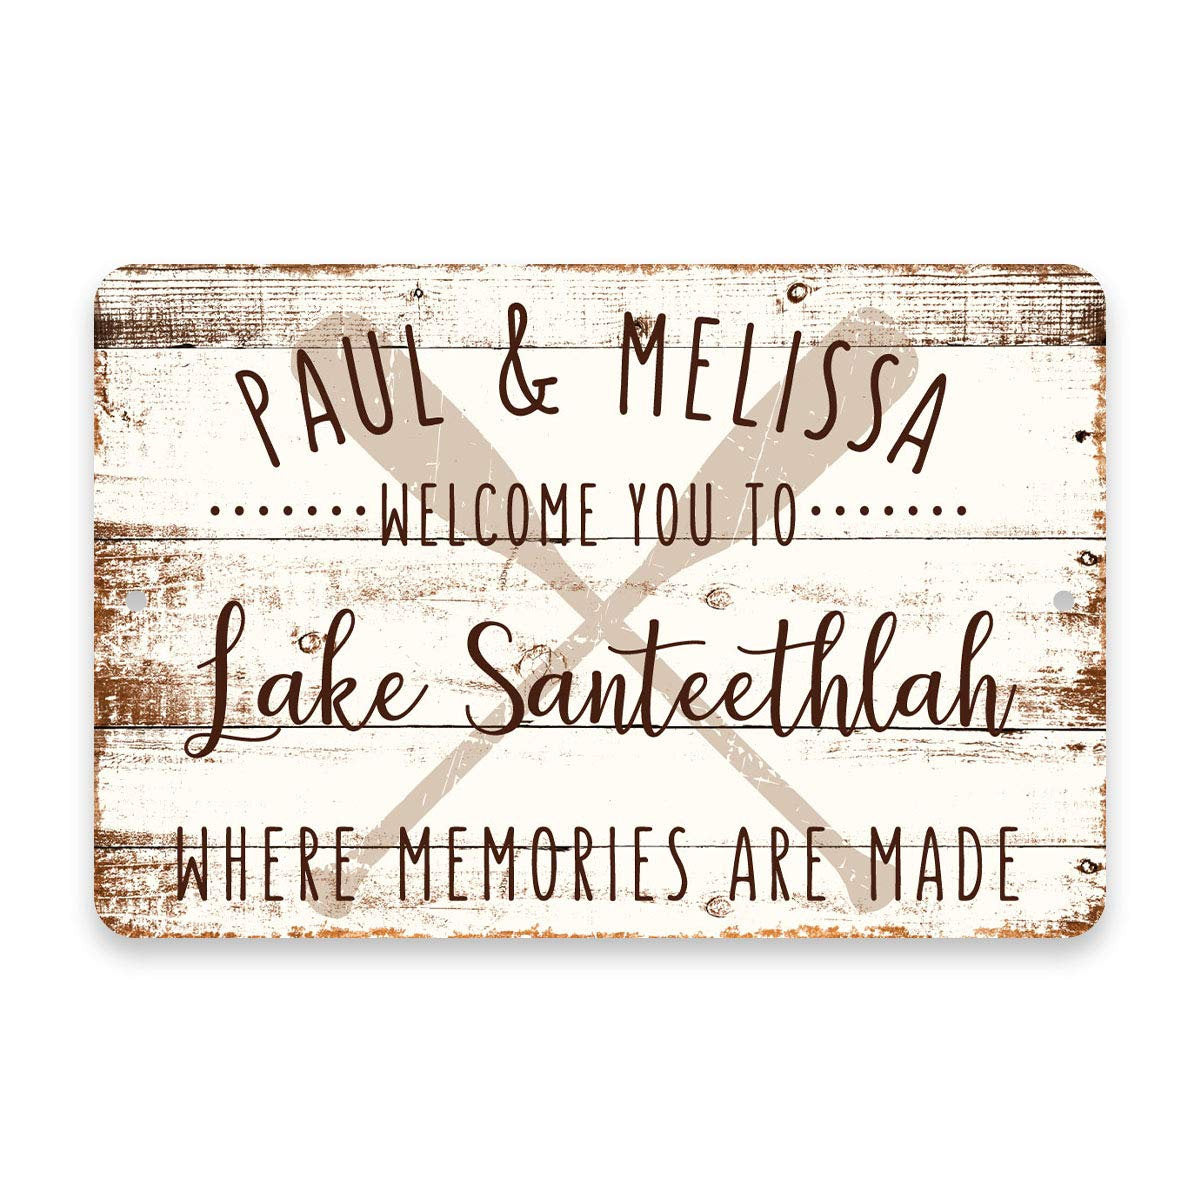 Personalized Welcome to Lake Santeethlah Where Memories are Made Sign - 8 X 12 Metal Sign with Wood Look